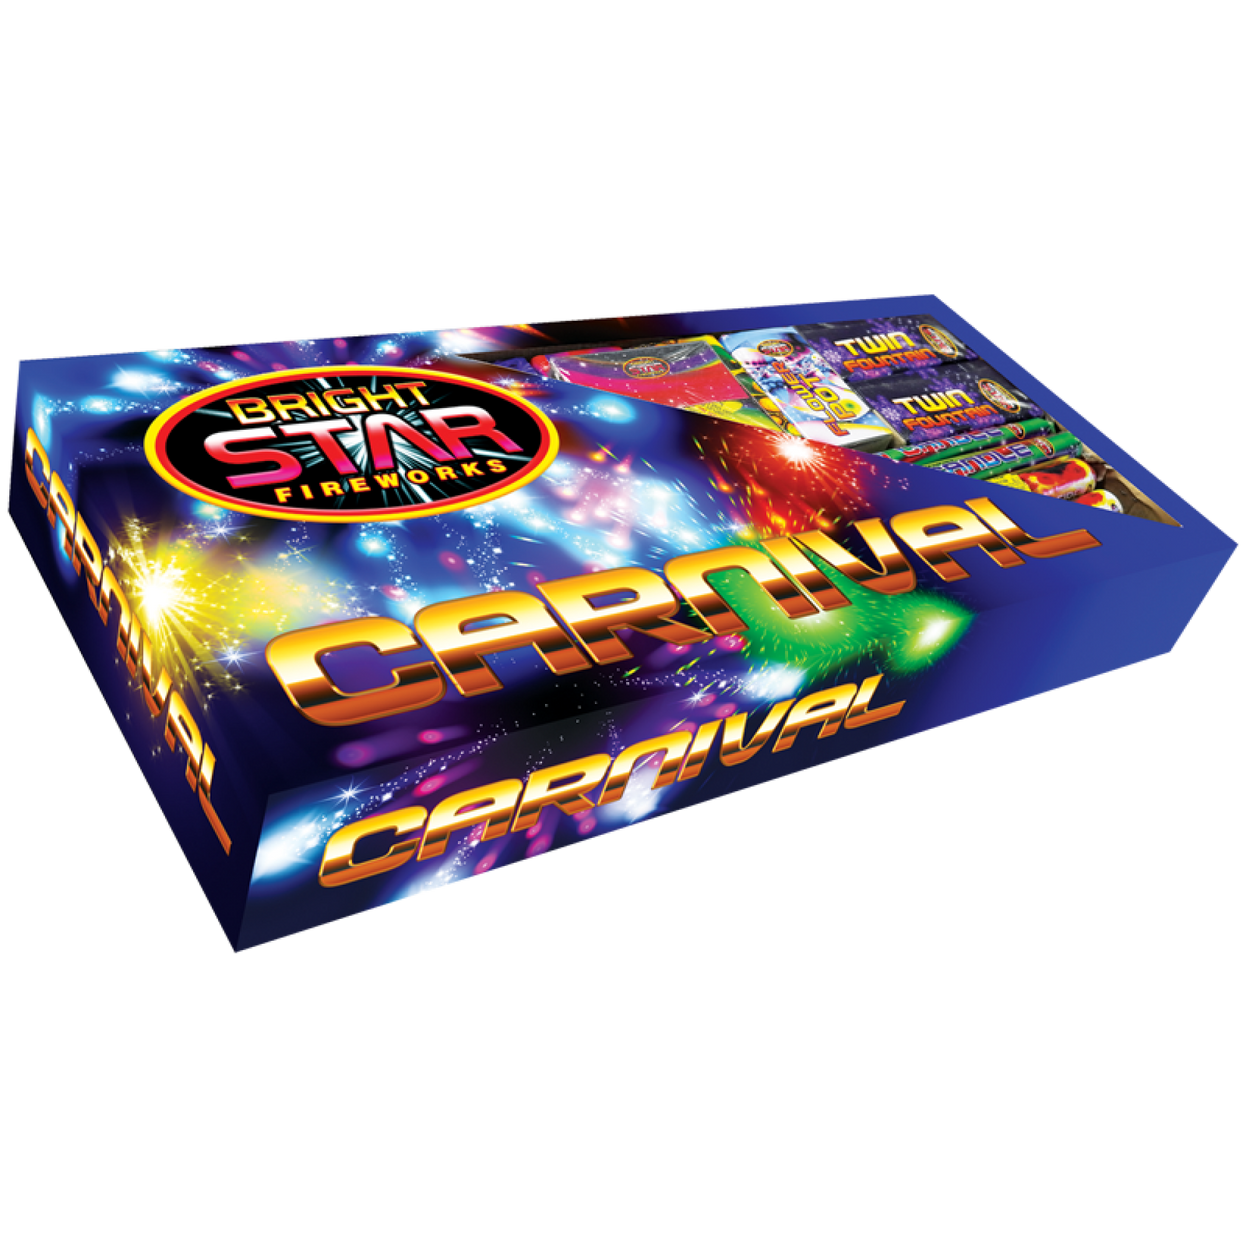 Carnival Selection Box 32pce By Bright Star Fireworks - BUY 1 GET 1 FREE!